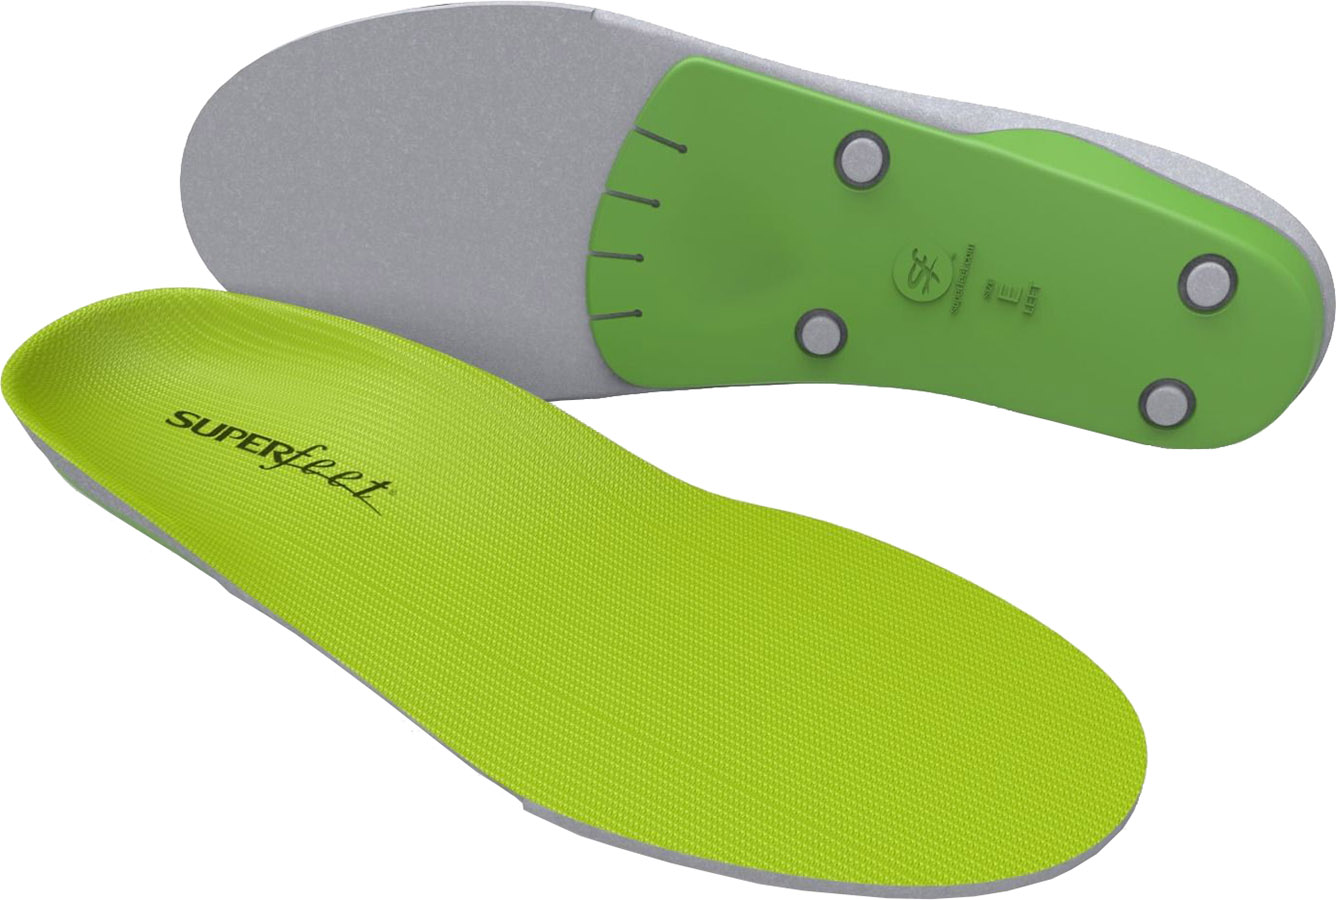 Superfeet All-Purpose Wide Fit Support (Wide Green) Performance Running/Hiking Insoles